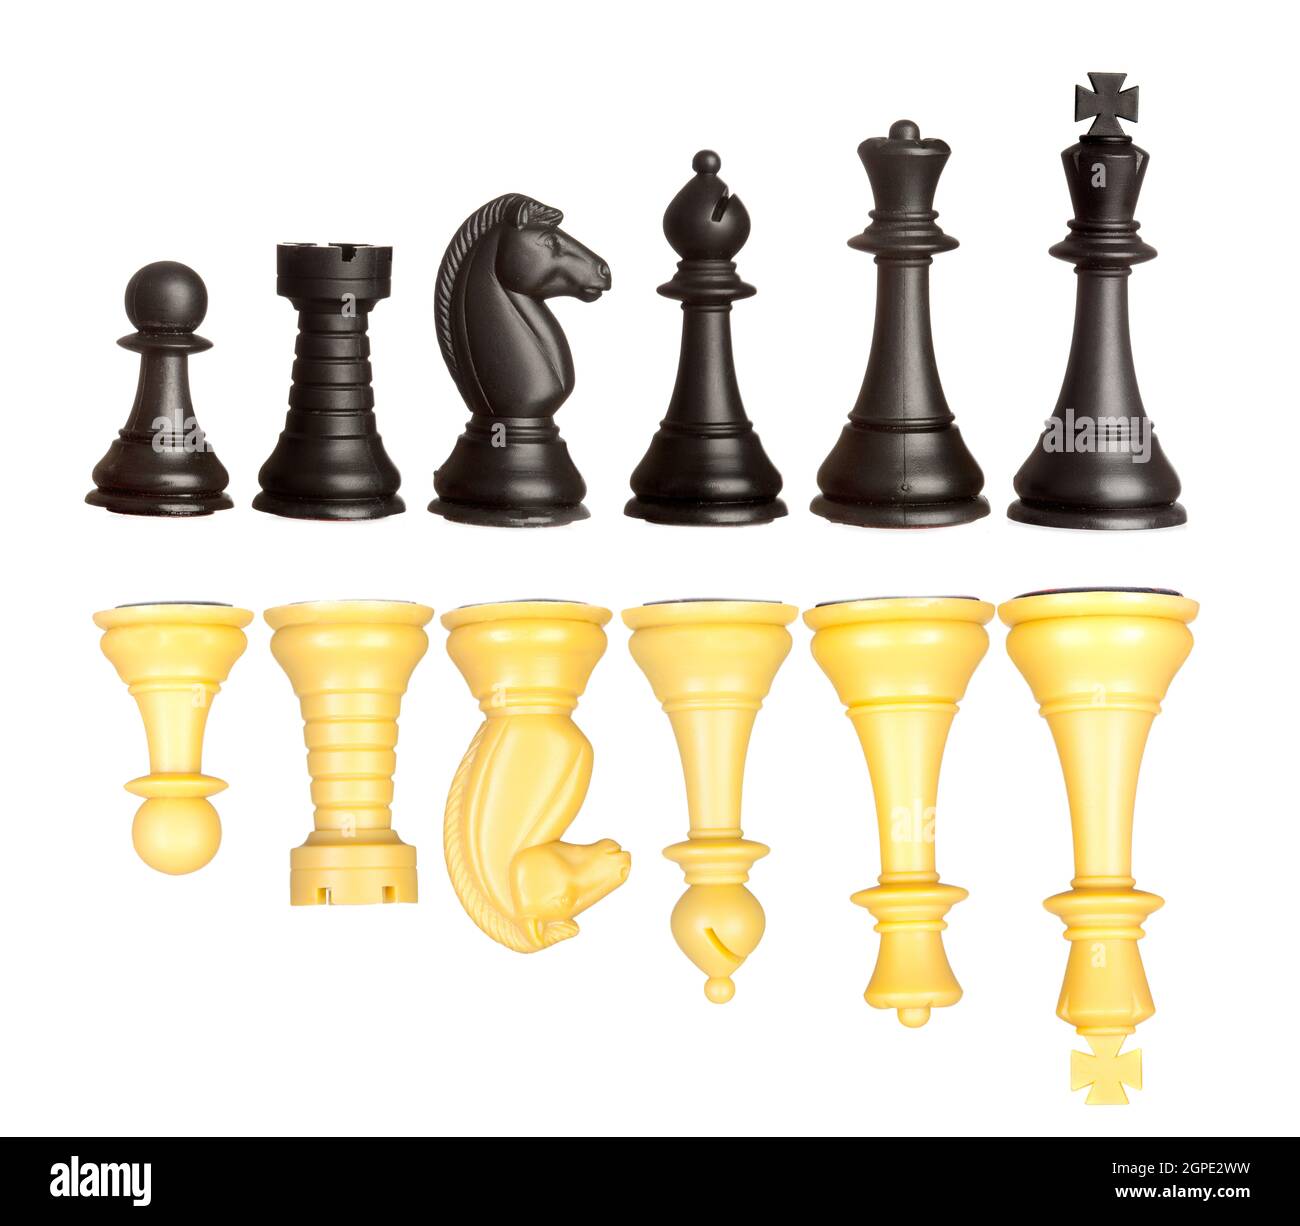 Set of black and white chess pieces isolated on a white background Stock Photo